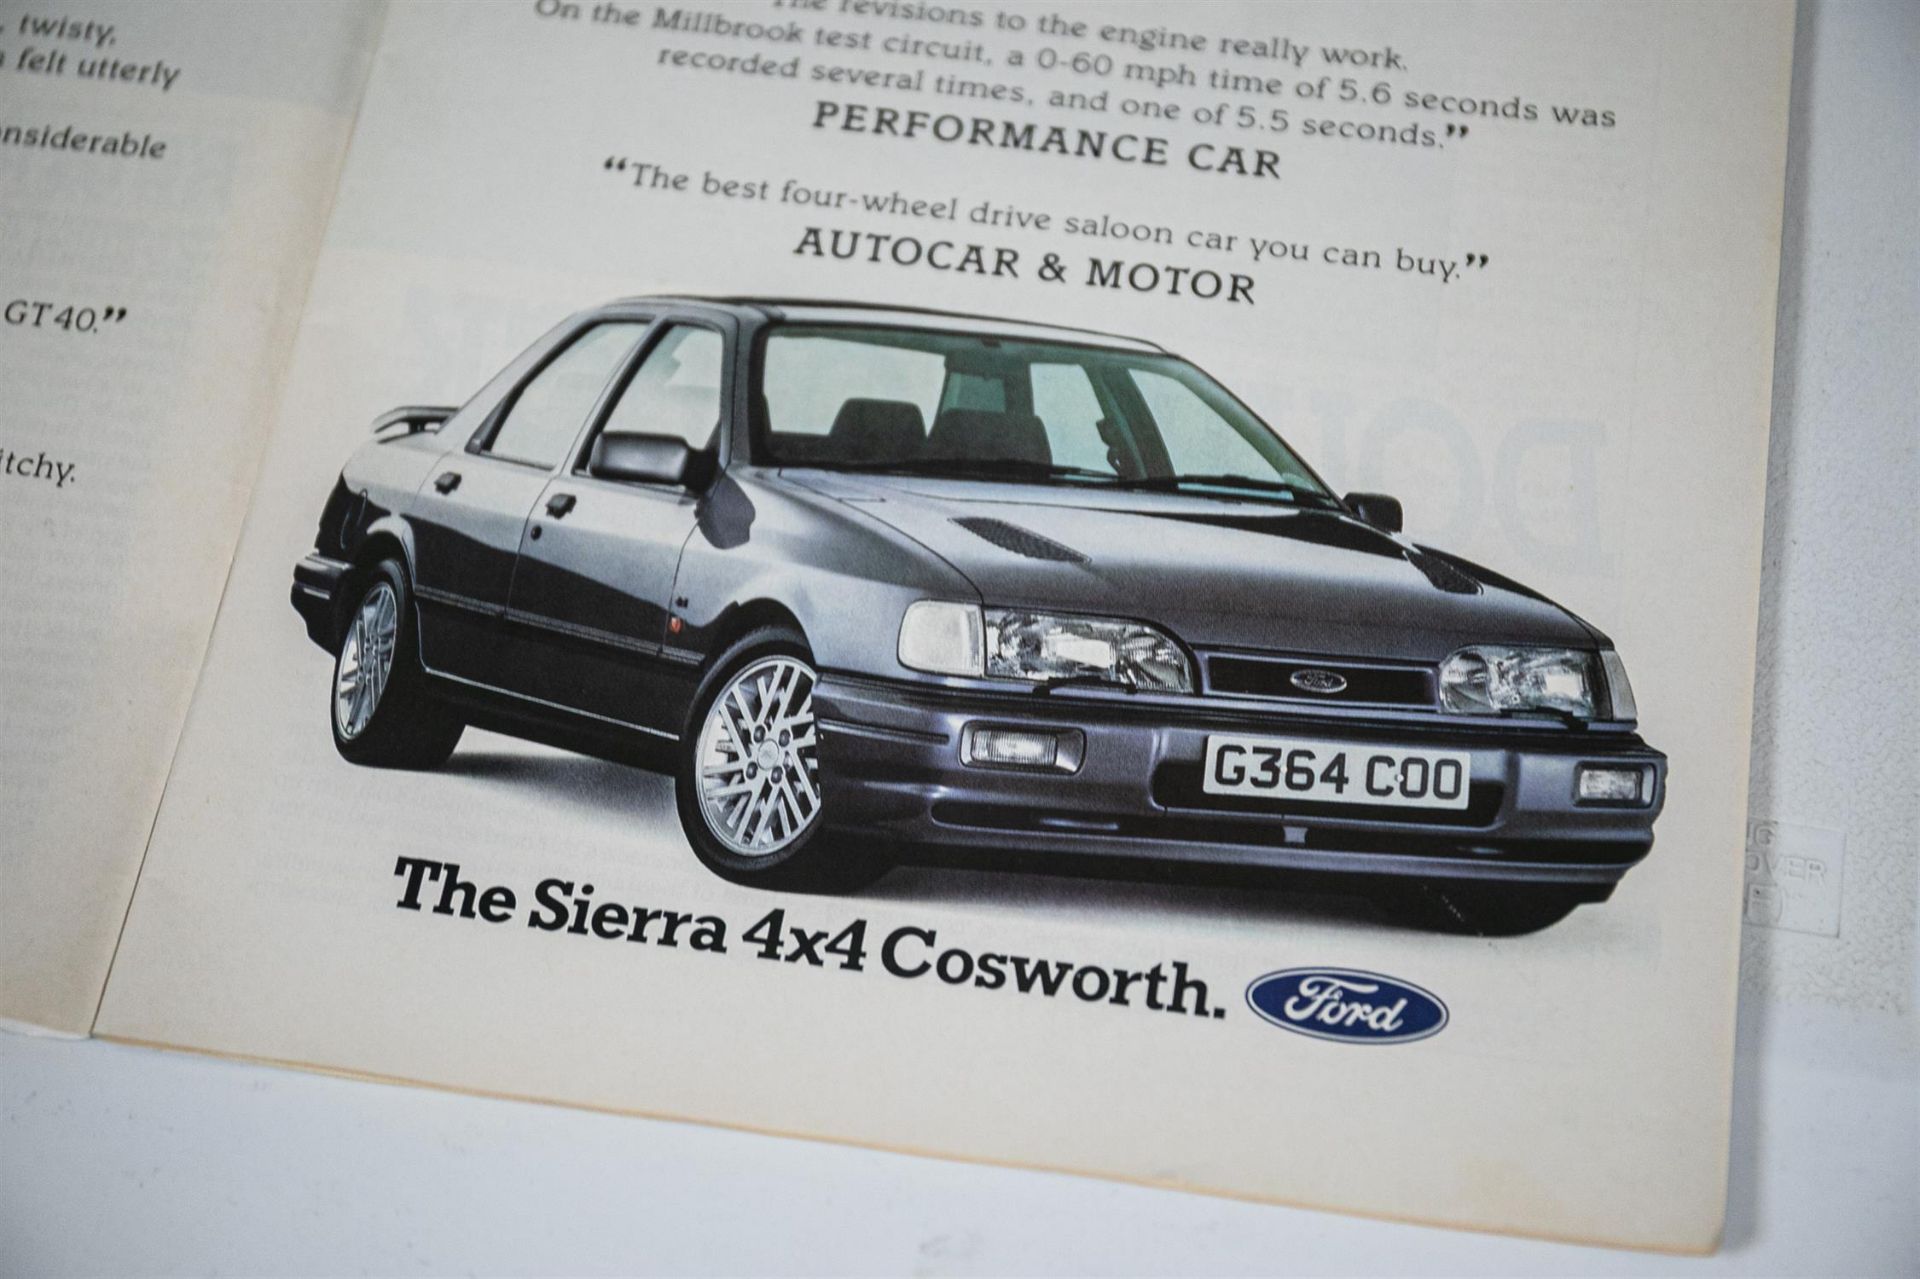 1990 Ford Sierra Sapphire RS Cosworth 4x4 - ex-Press Car - Image 8 of 10